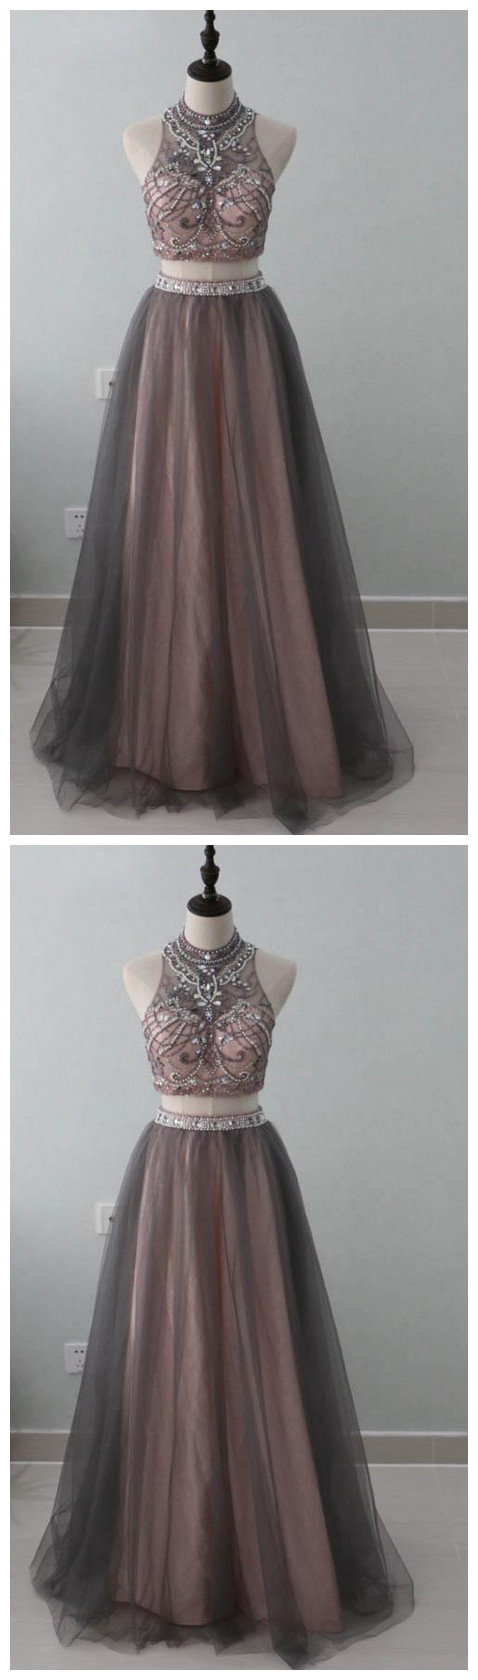 2 Pieces Popular Charming Beaded Tulle Inexpensive Long Prom Dresses